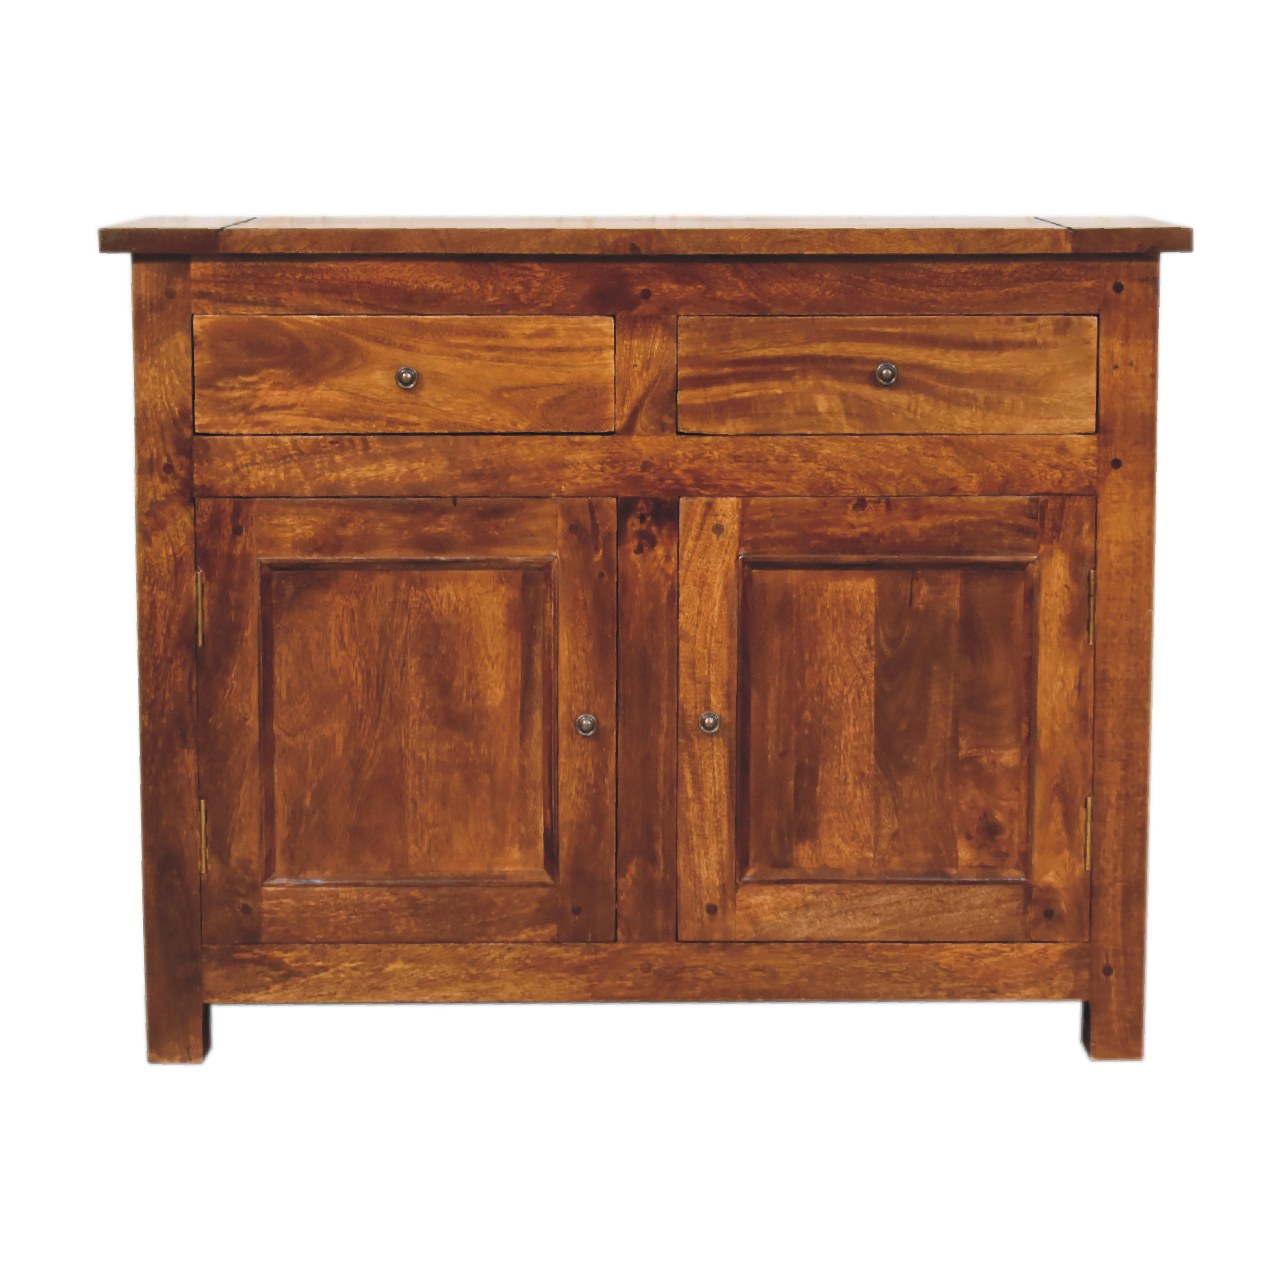 Chestnut Sideboard with 2 Drawers